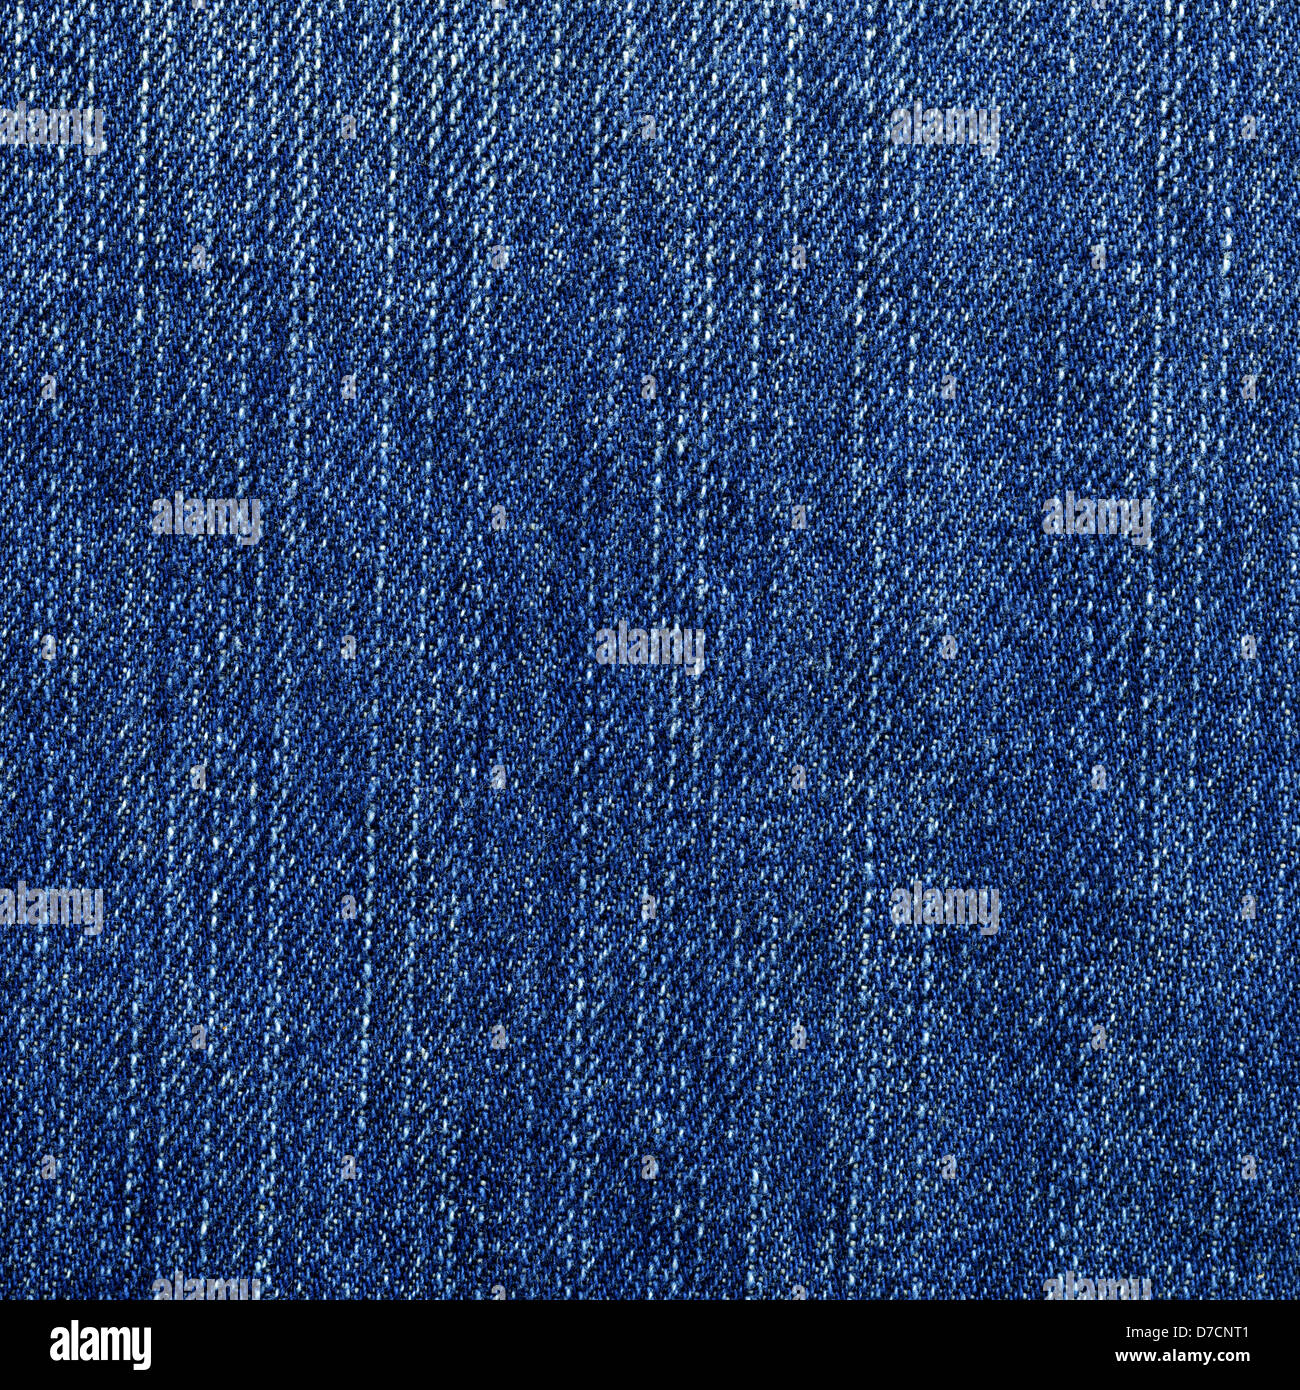 High resolution scan of blue denim fabric. Scanned at 2400dpi using a ...